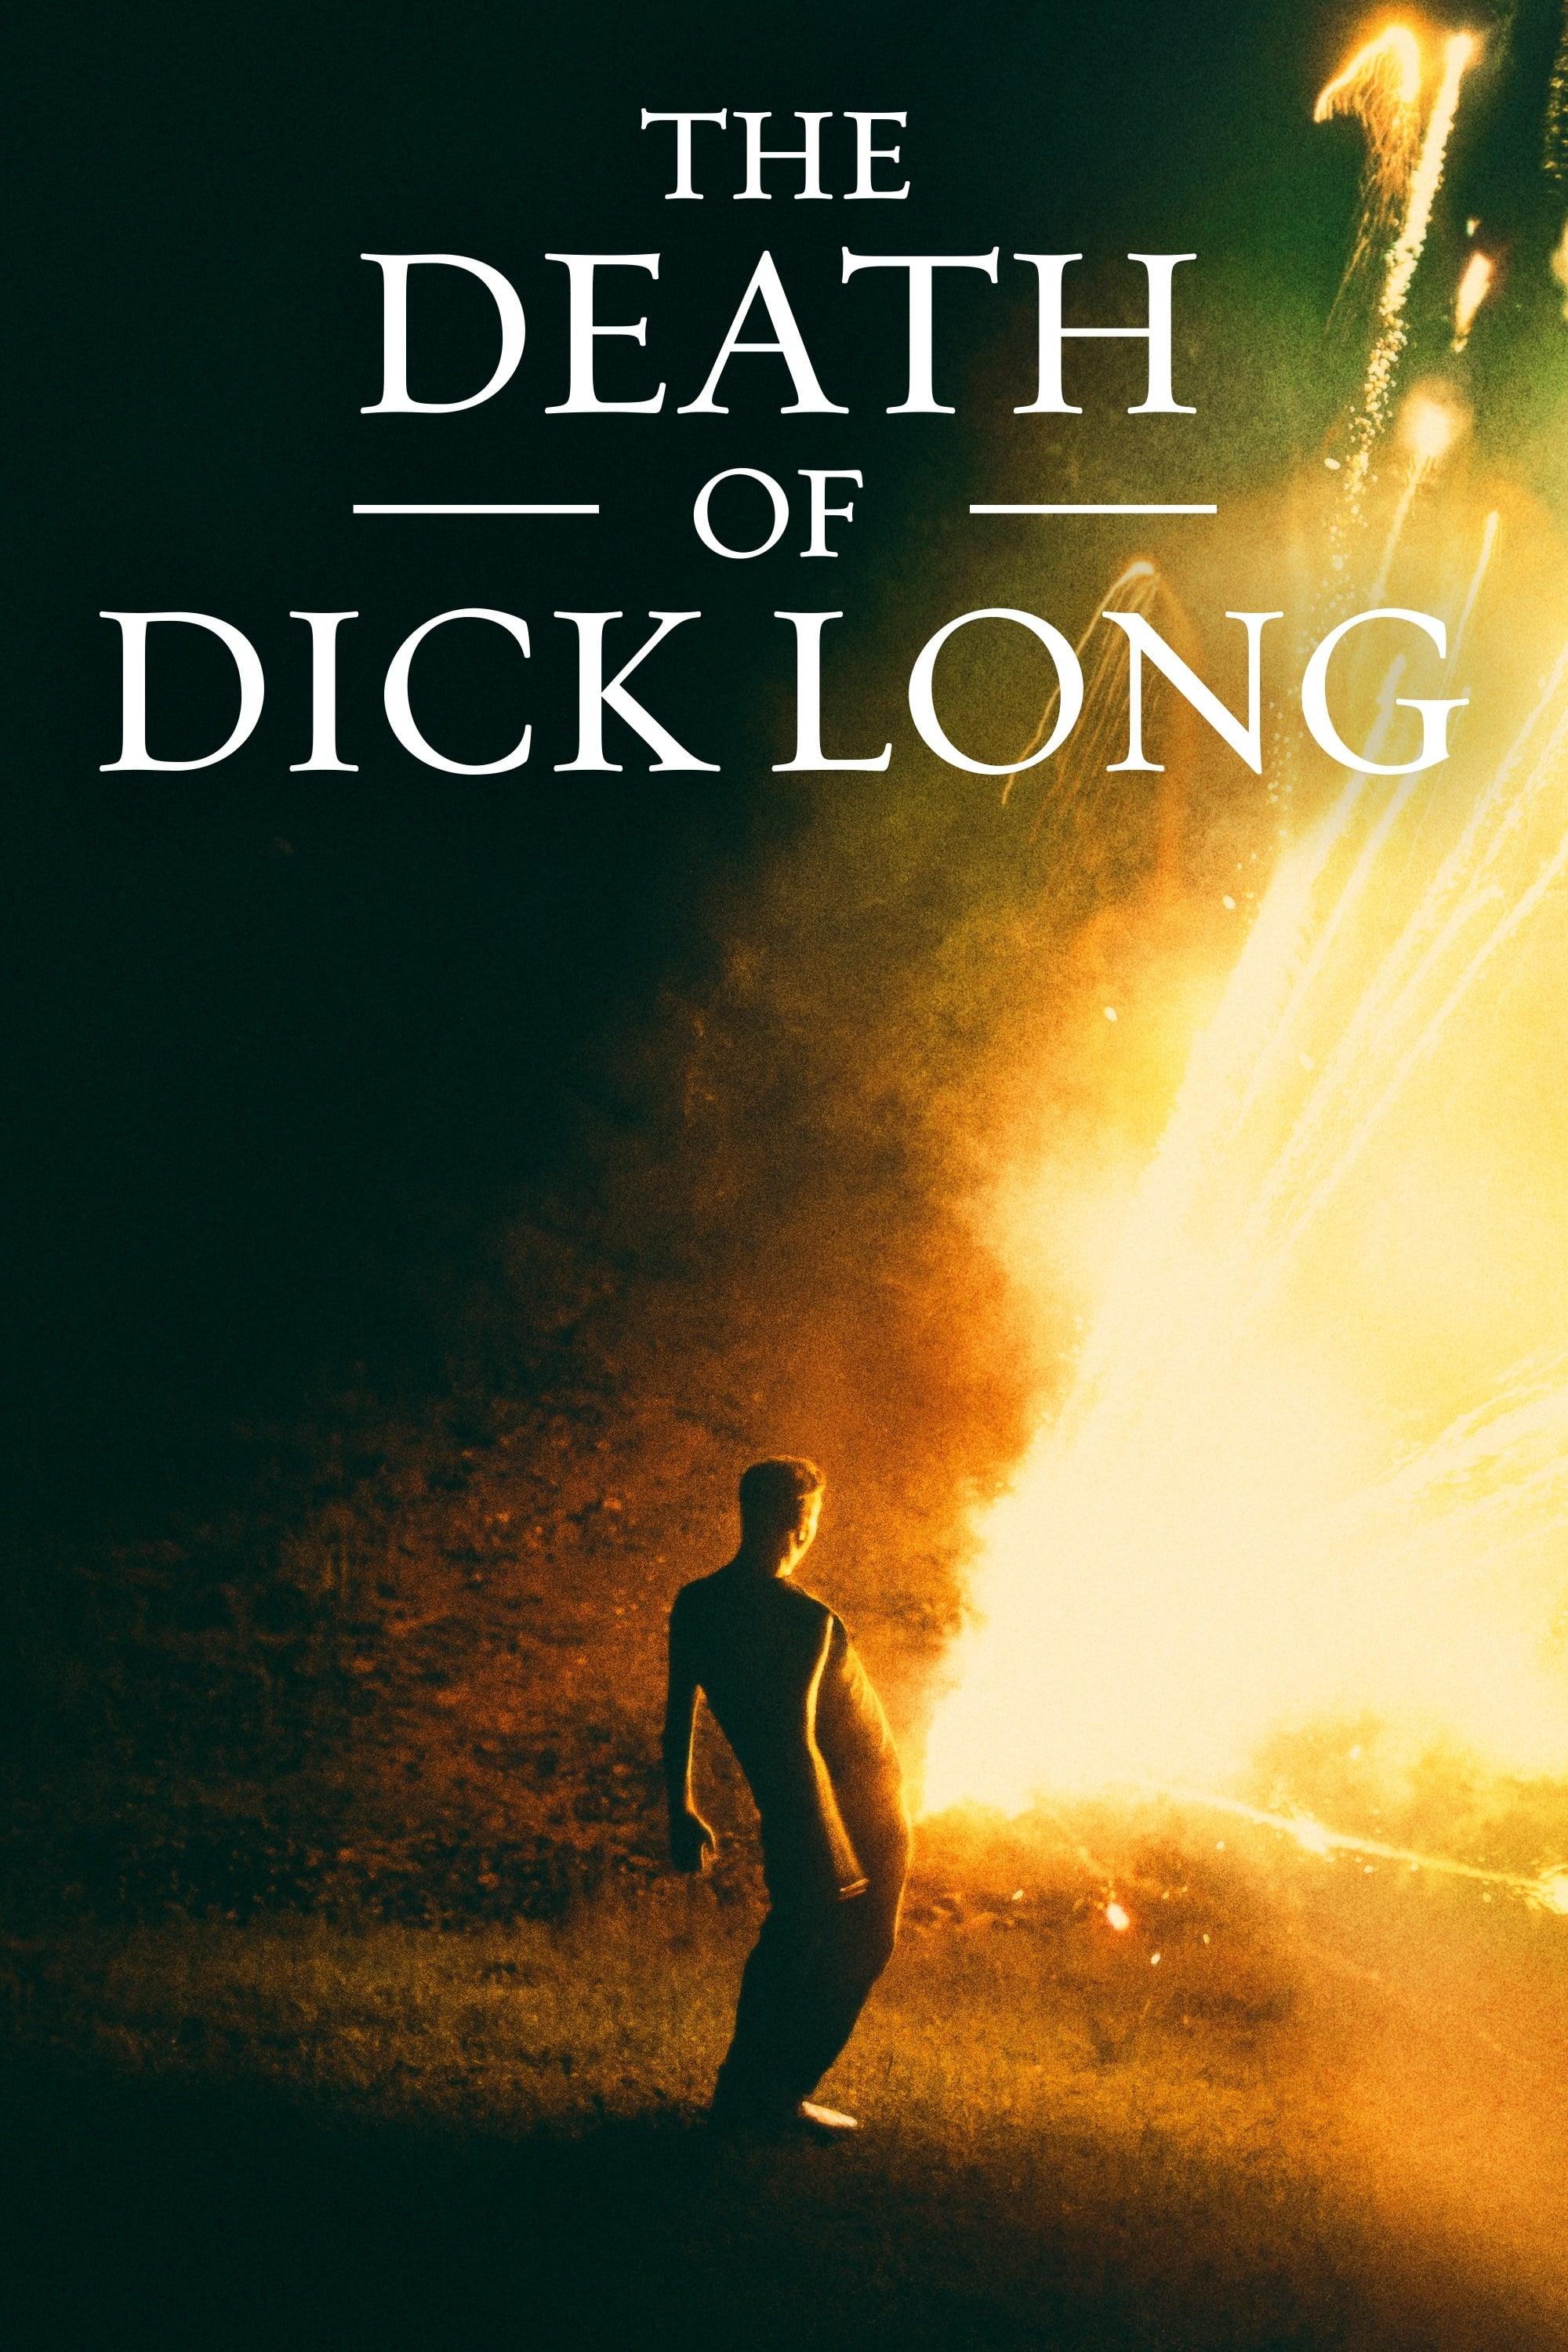 The Death of Dick Long poster